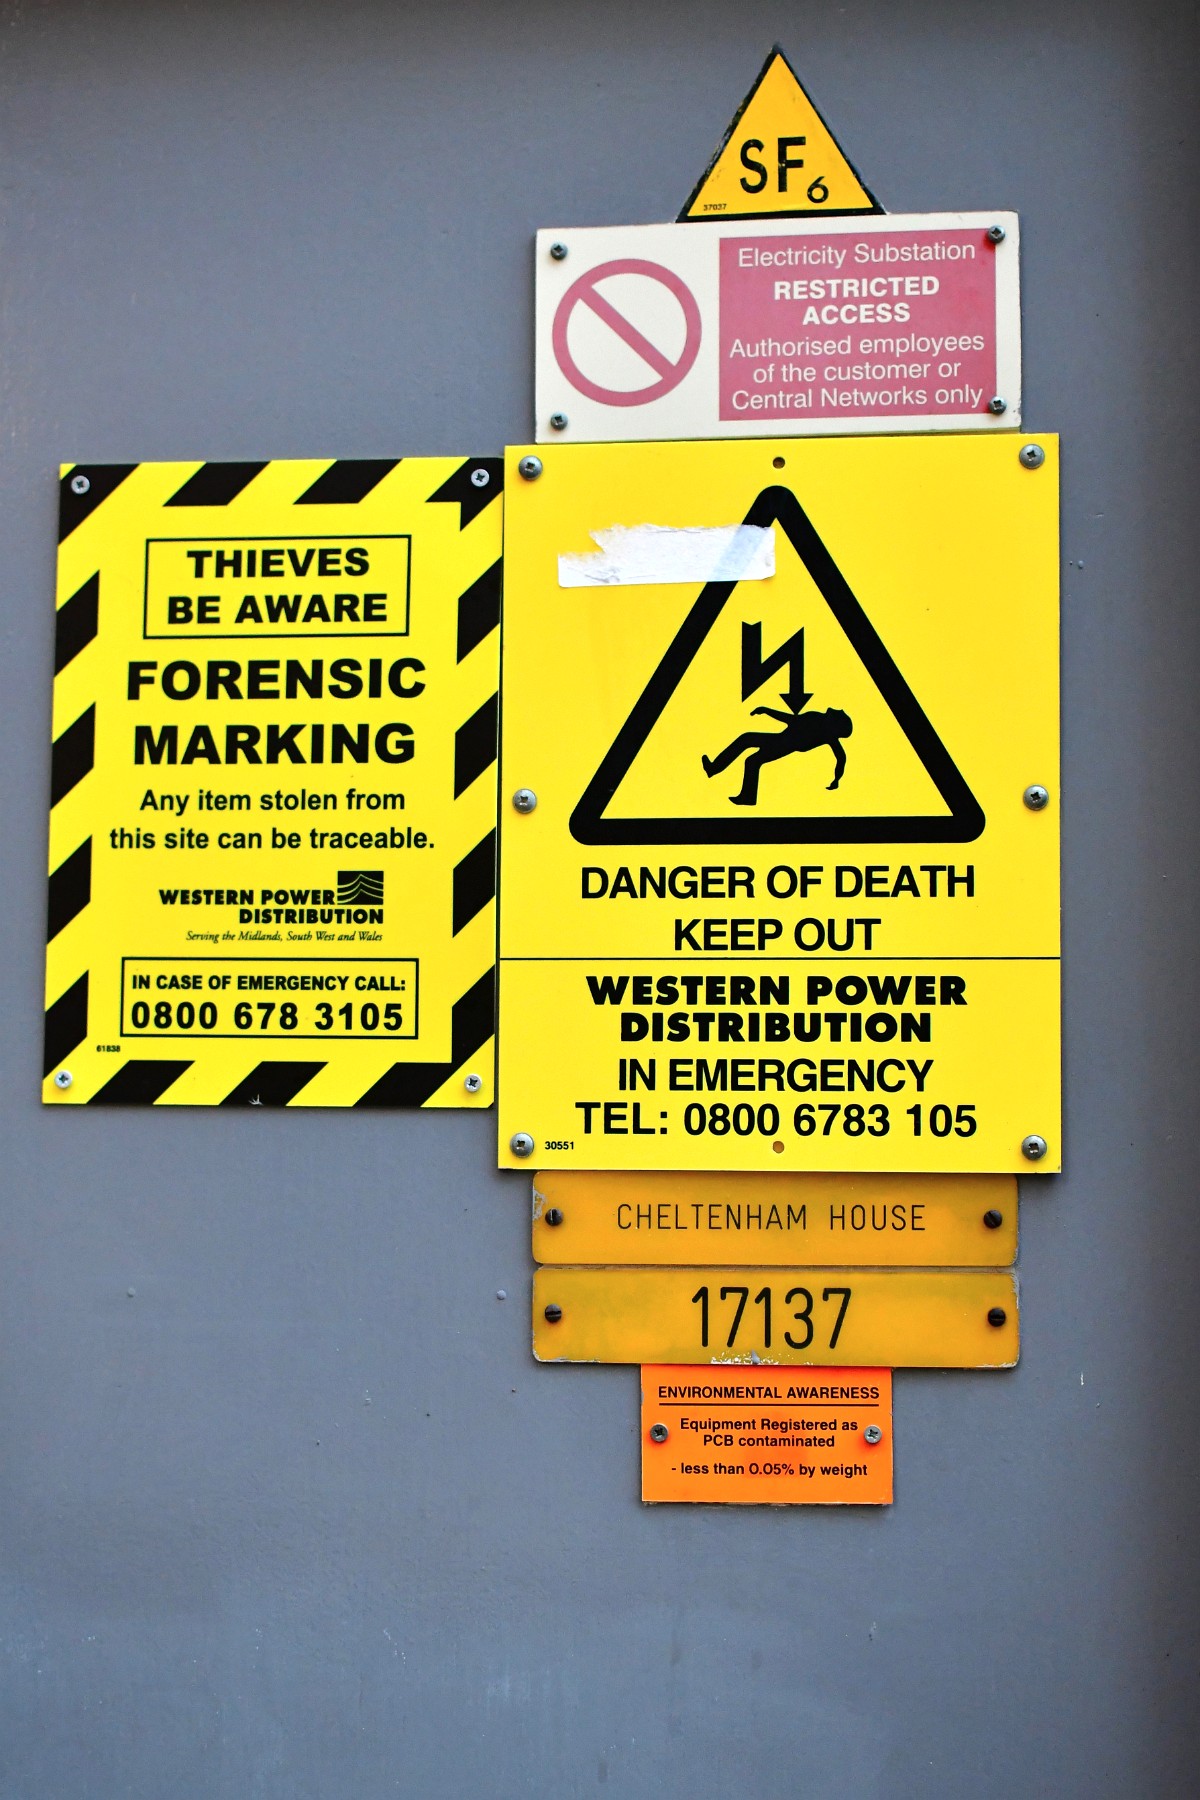 Forensic Marking and Danger of Death 